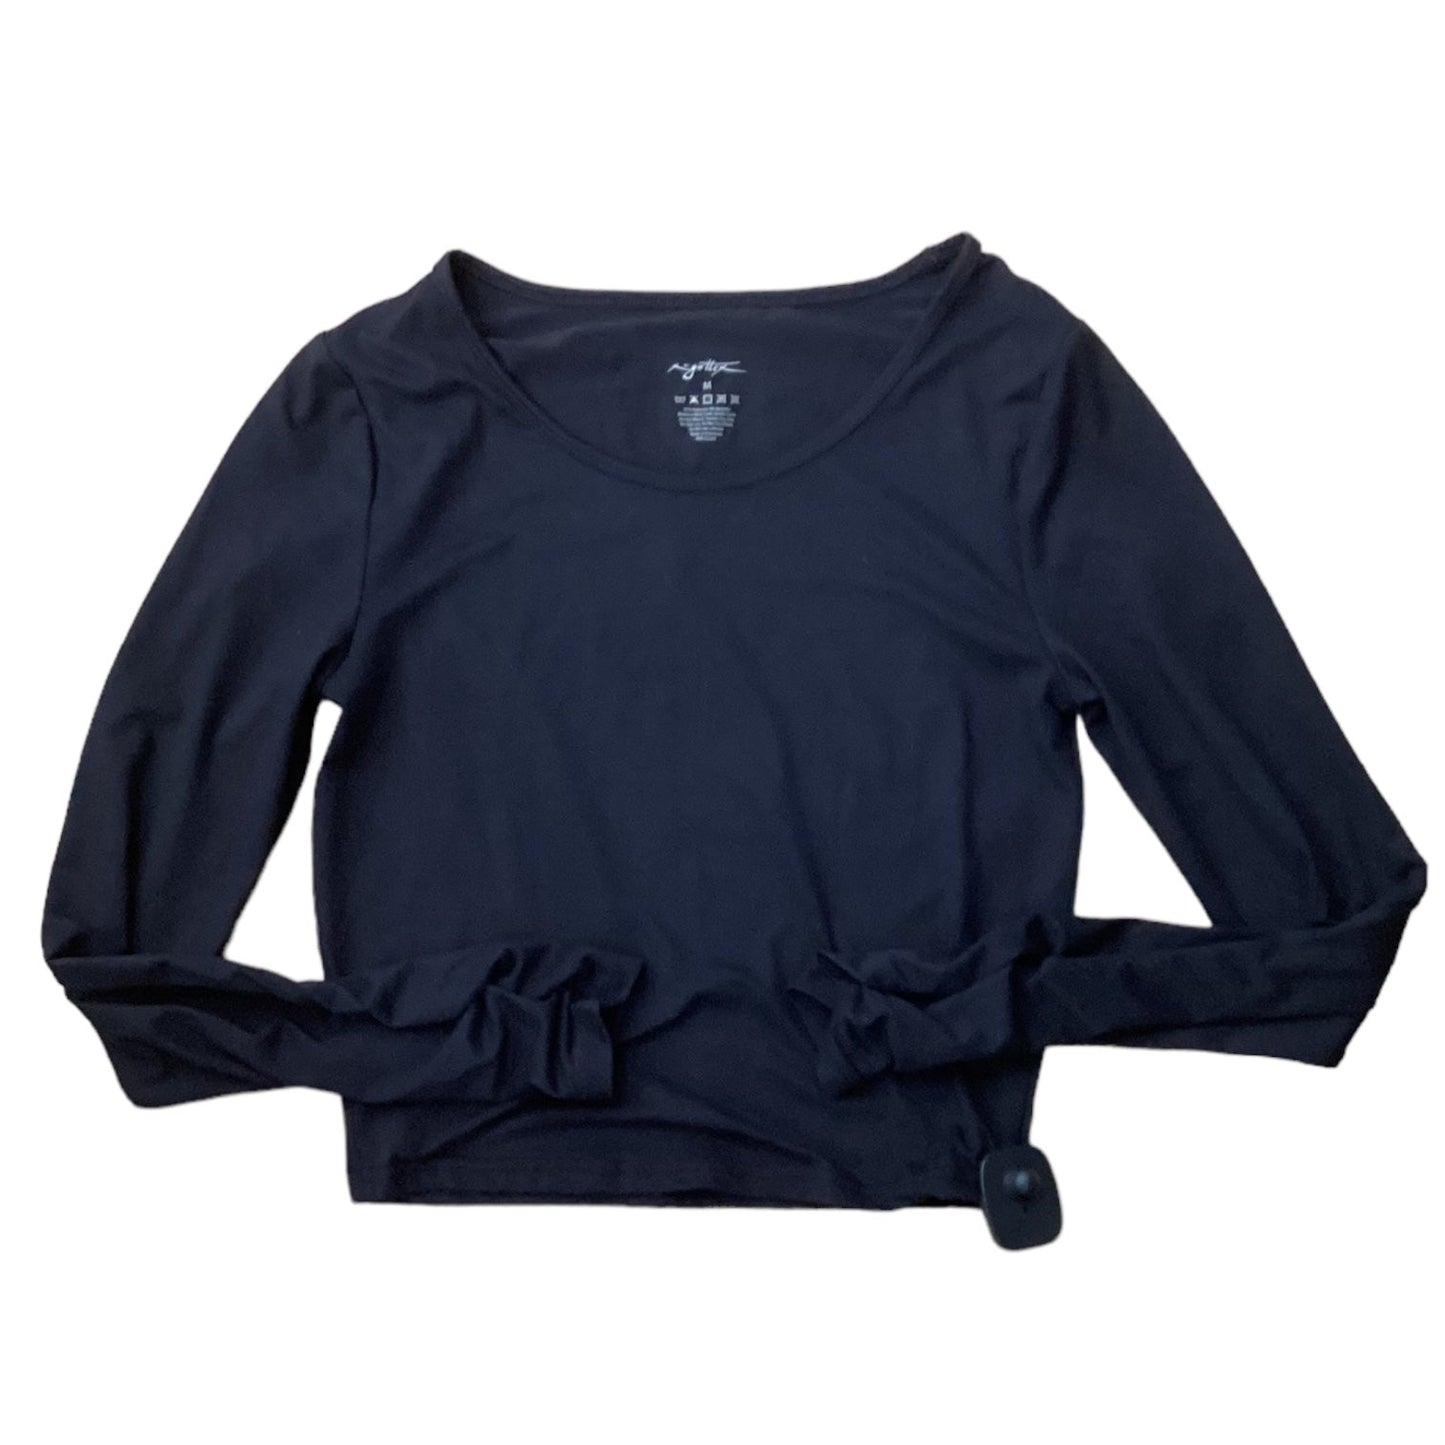 Athletic Top Long Sleeve Crewneck By Gottex  Size: M